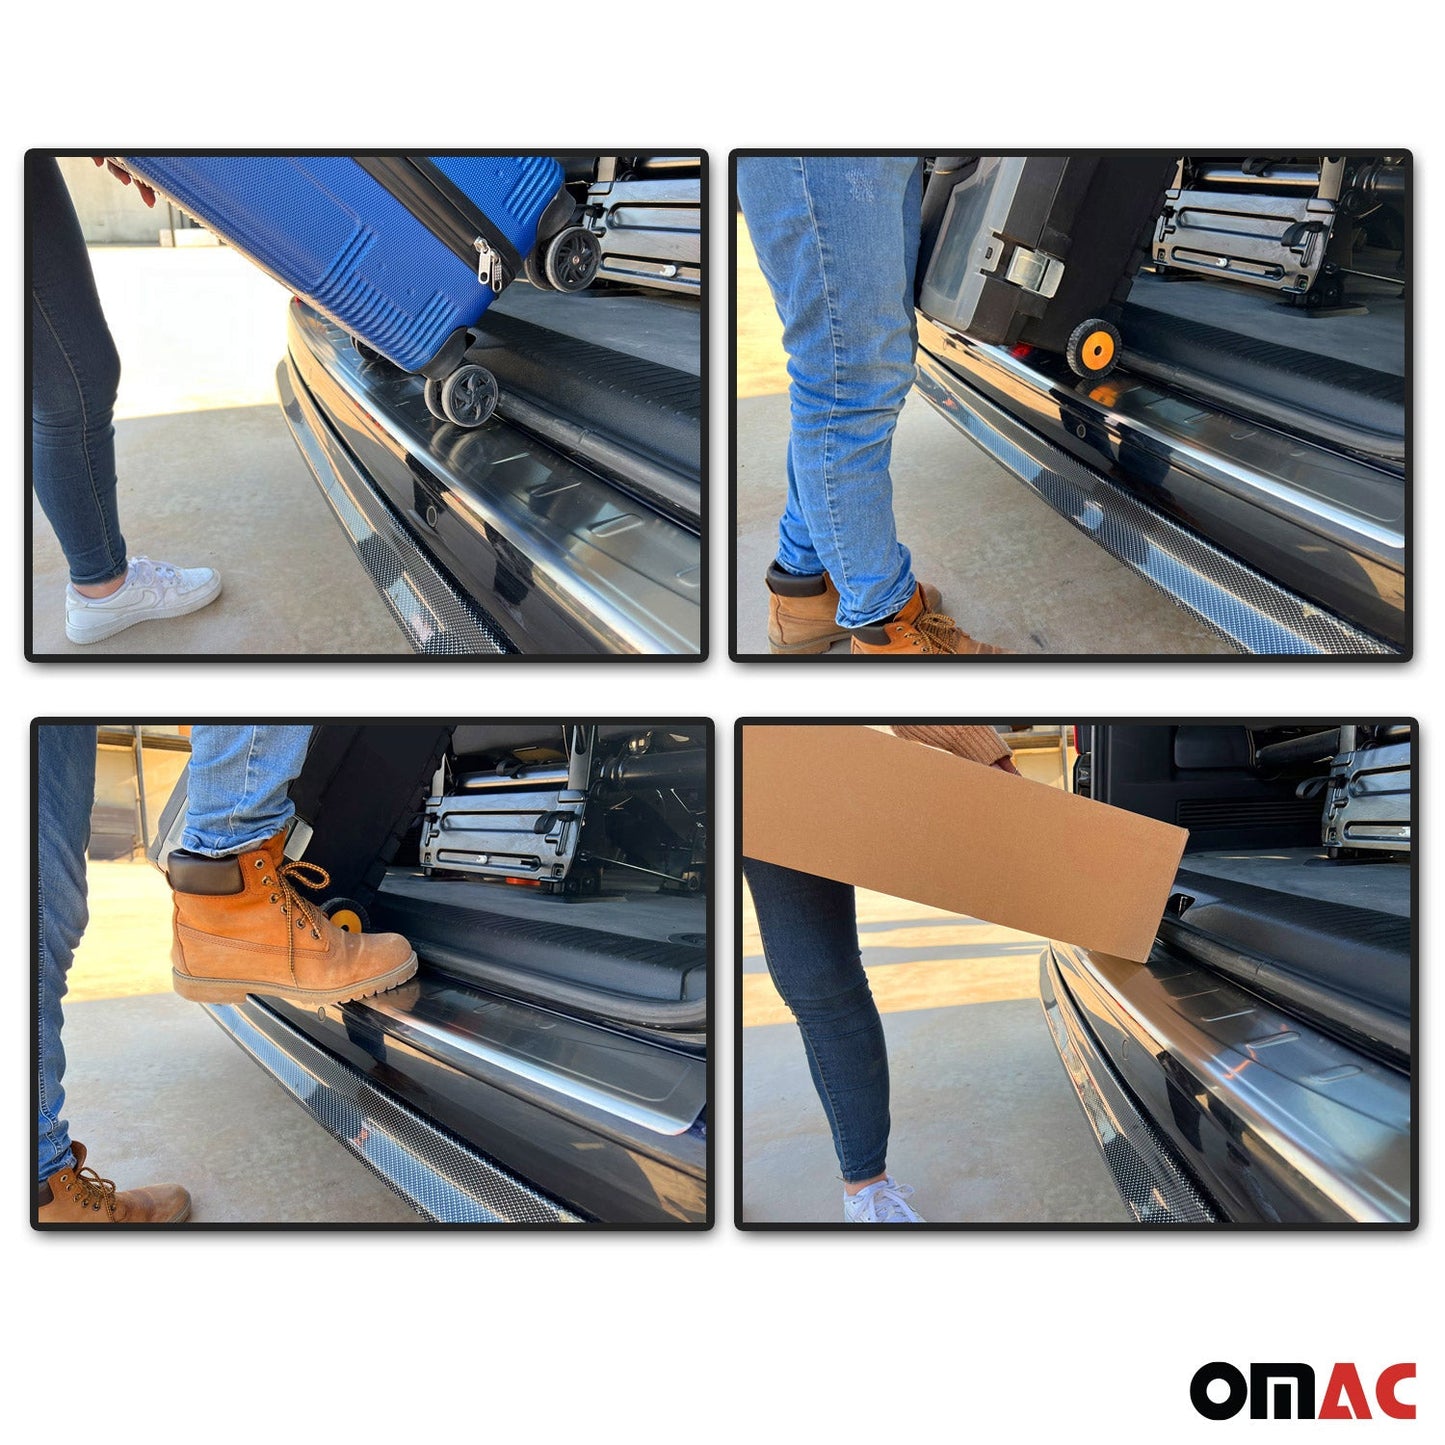 OMAC Fits BMW X6 E71 2008-2014 Chrome Rear Bumper Guard Trunk Sill Protector Brushed 1211093T